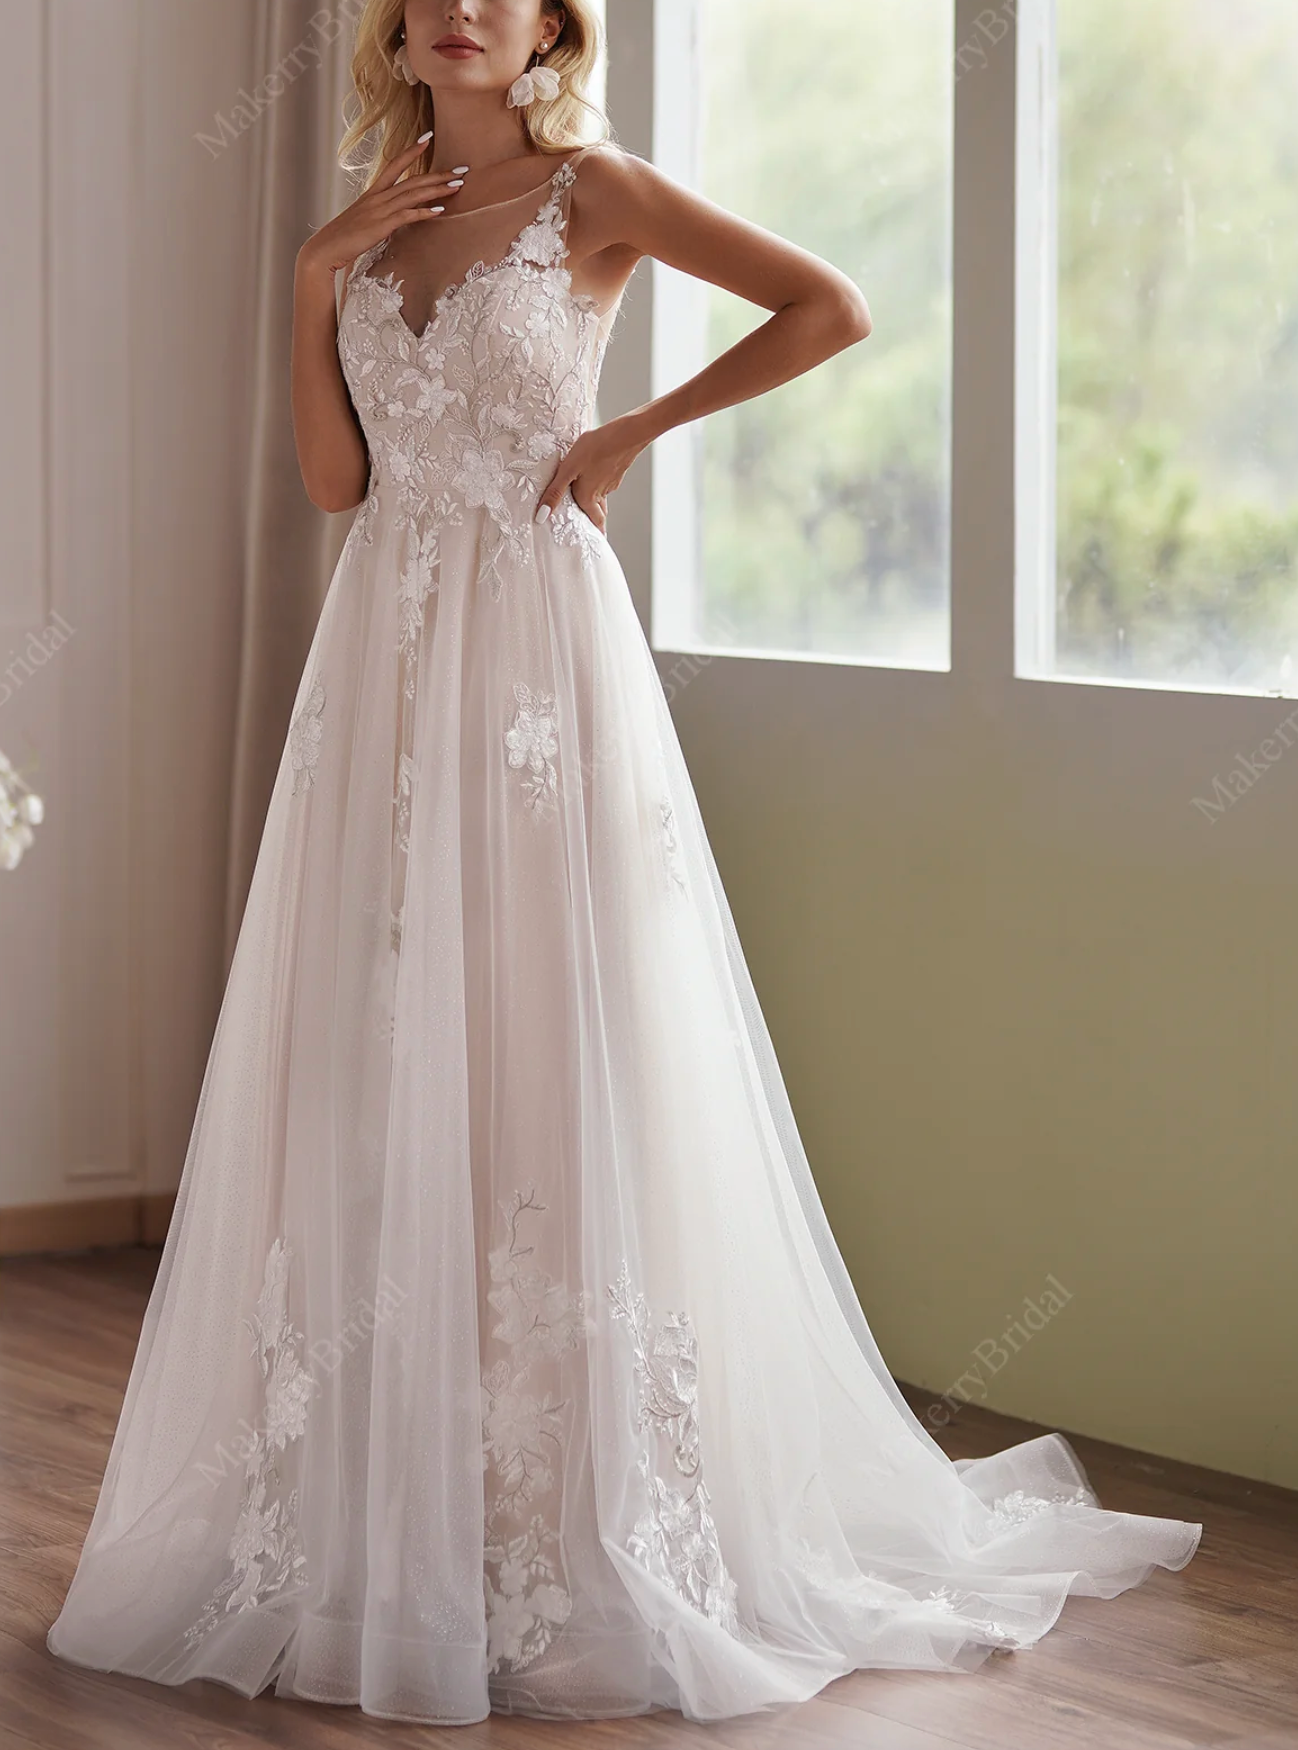 Romantic Beaded Lace Illusion Back Bridal Gown